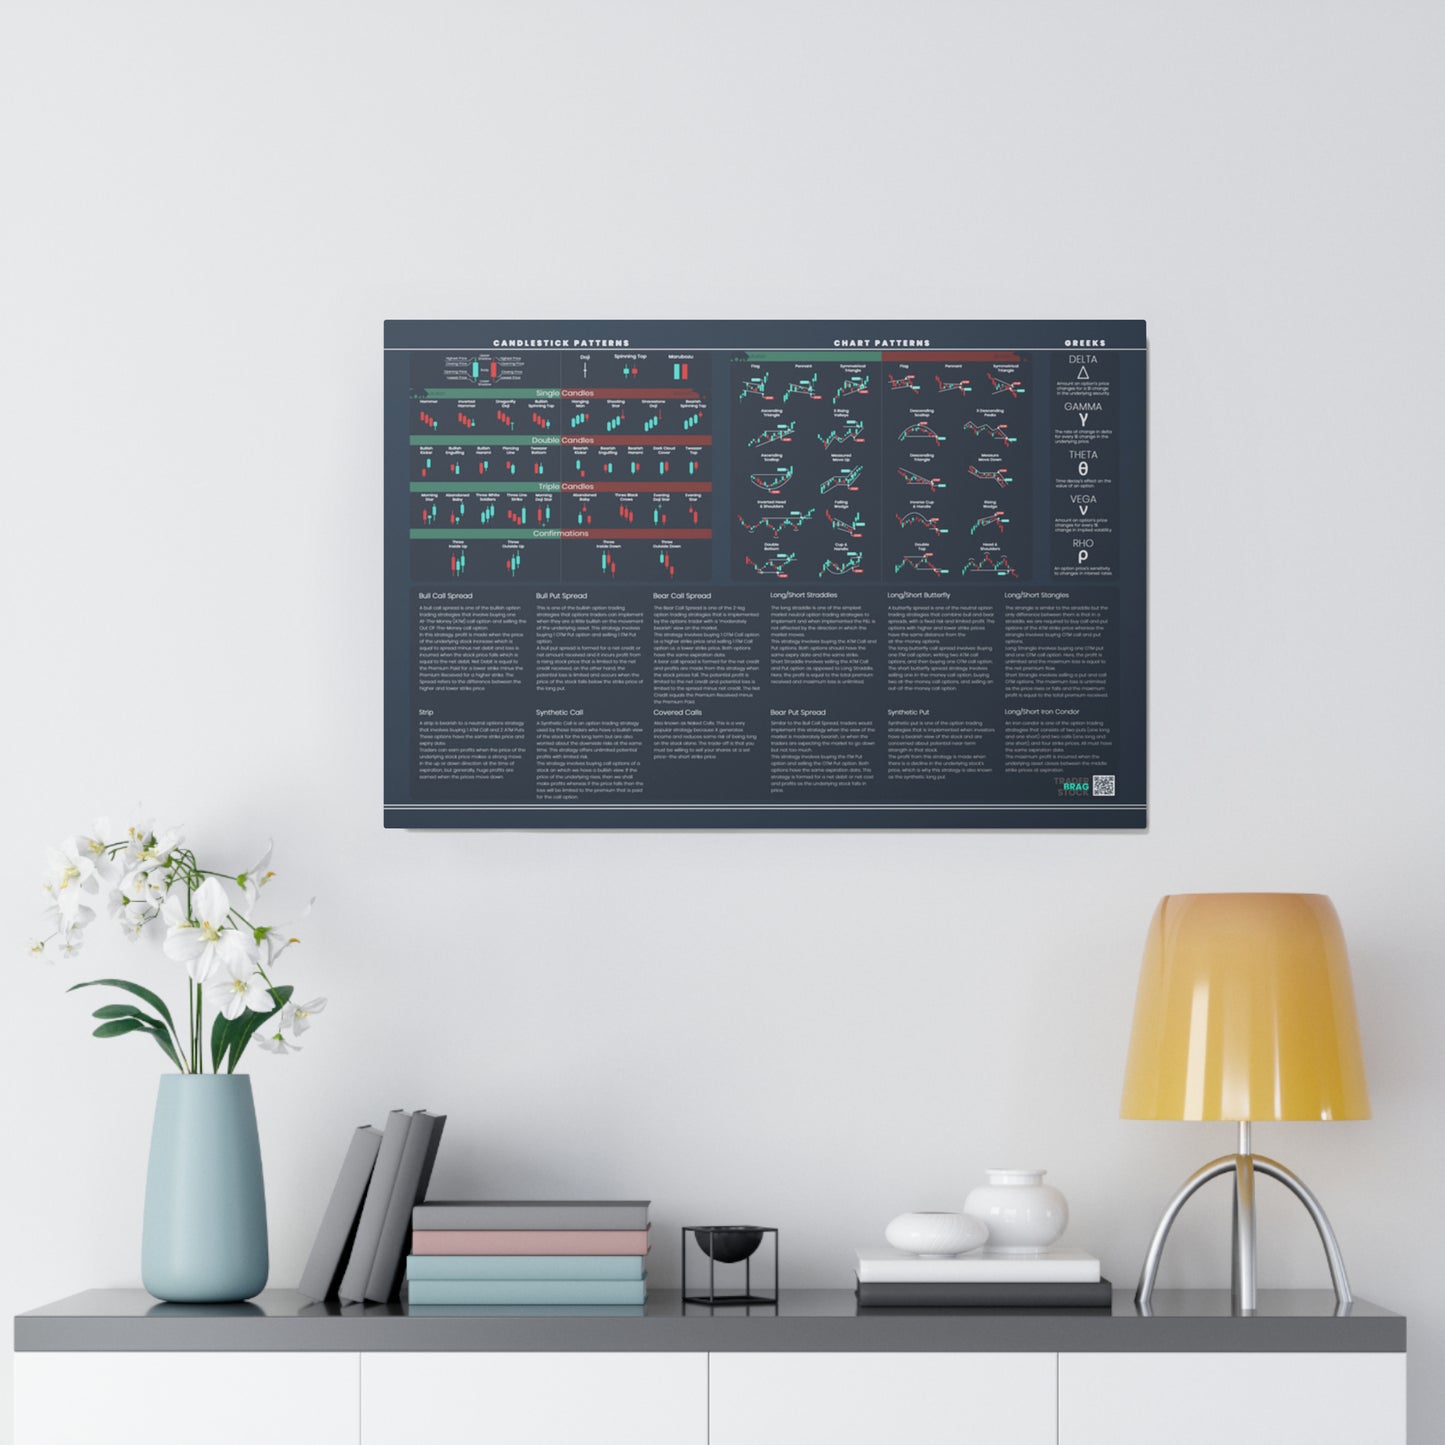 trader essentials black metal printed poster with all the most commonly used candlesticks, chart patterns, options greeks, options strategies cheat sheet for any day trader or swing trader